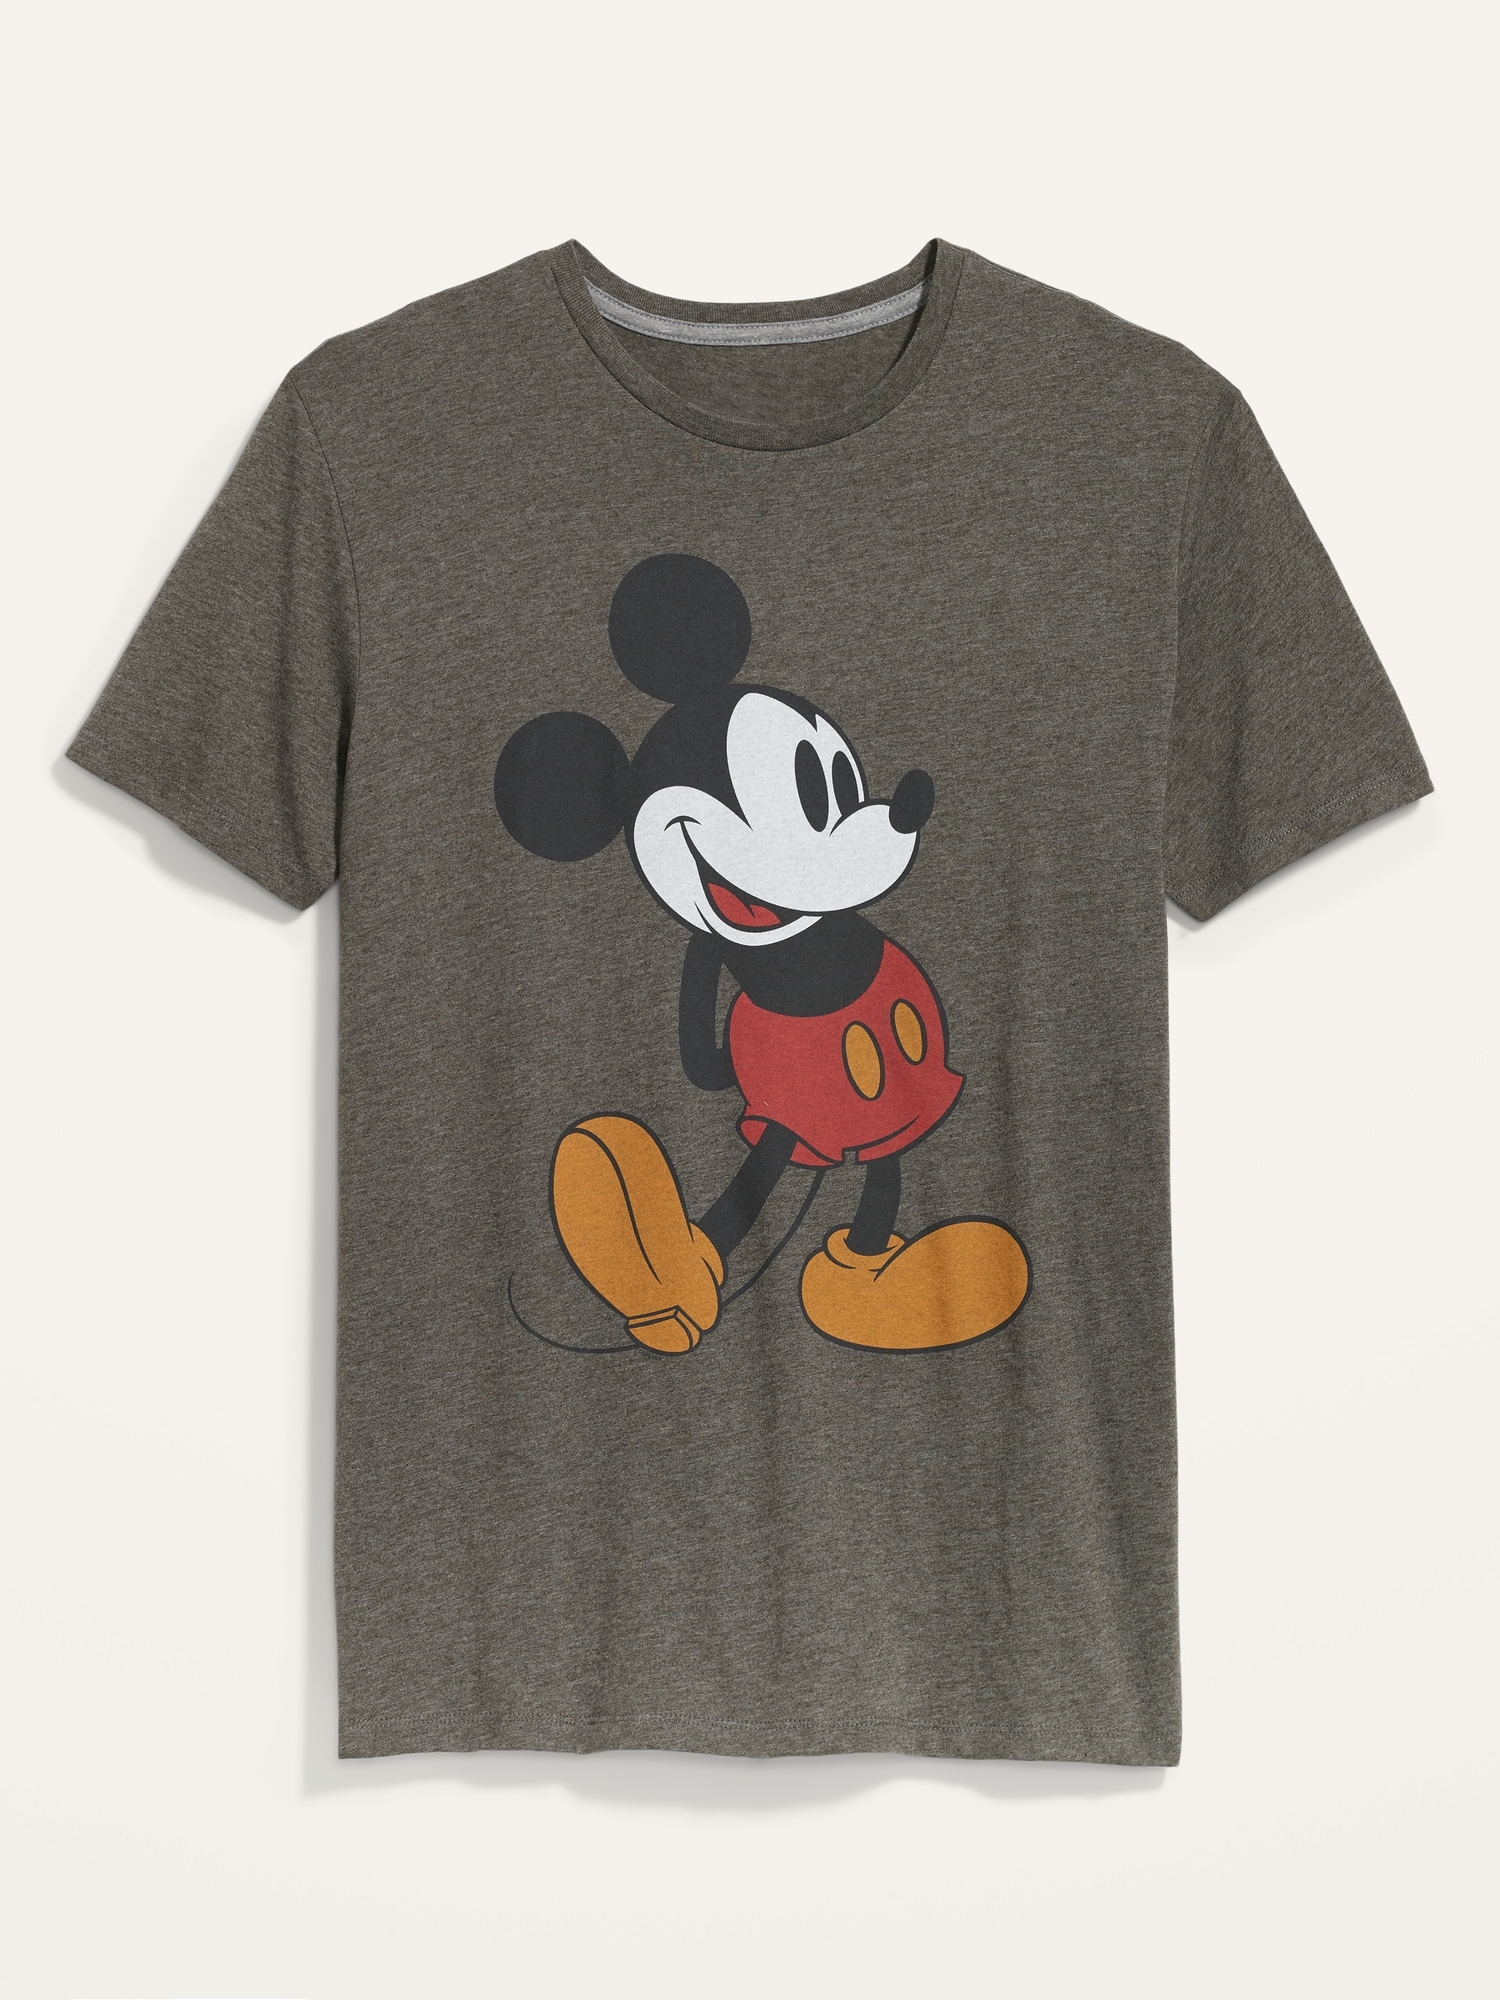 Disney© Mickey Mouse Gender-Neutral T-Shirt for Adults | Old Navy